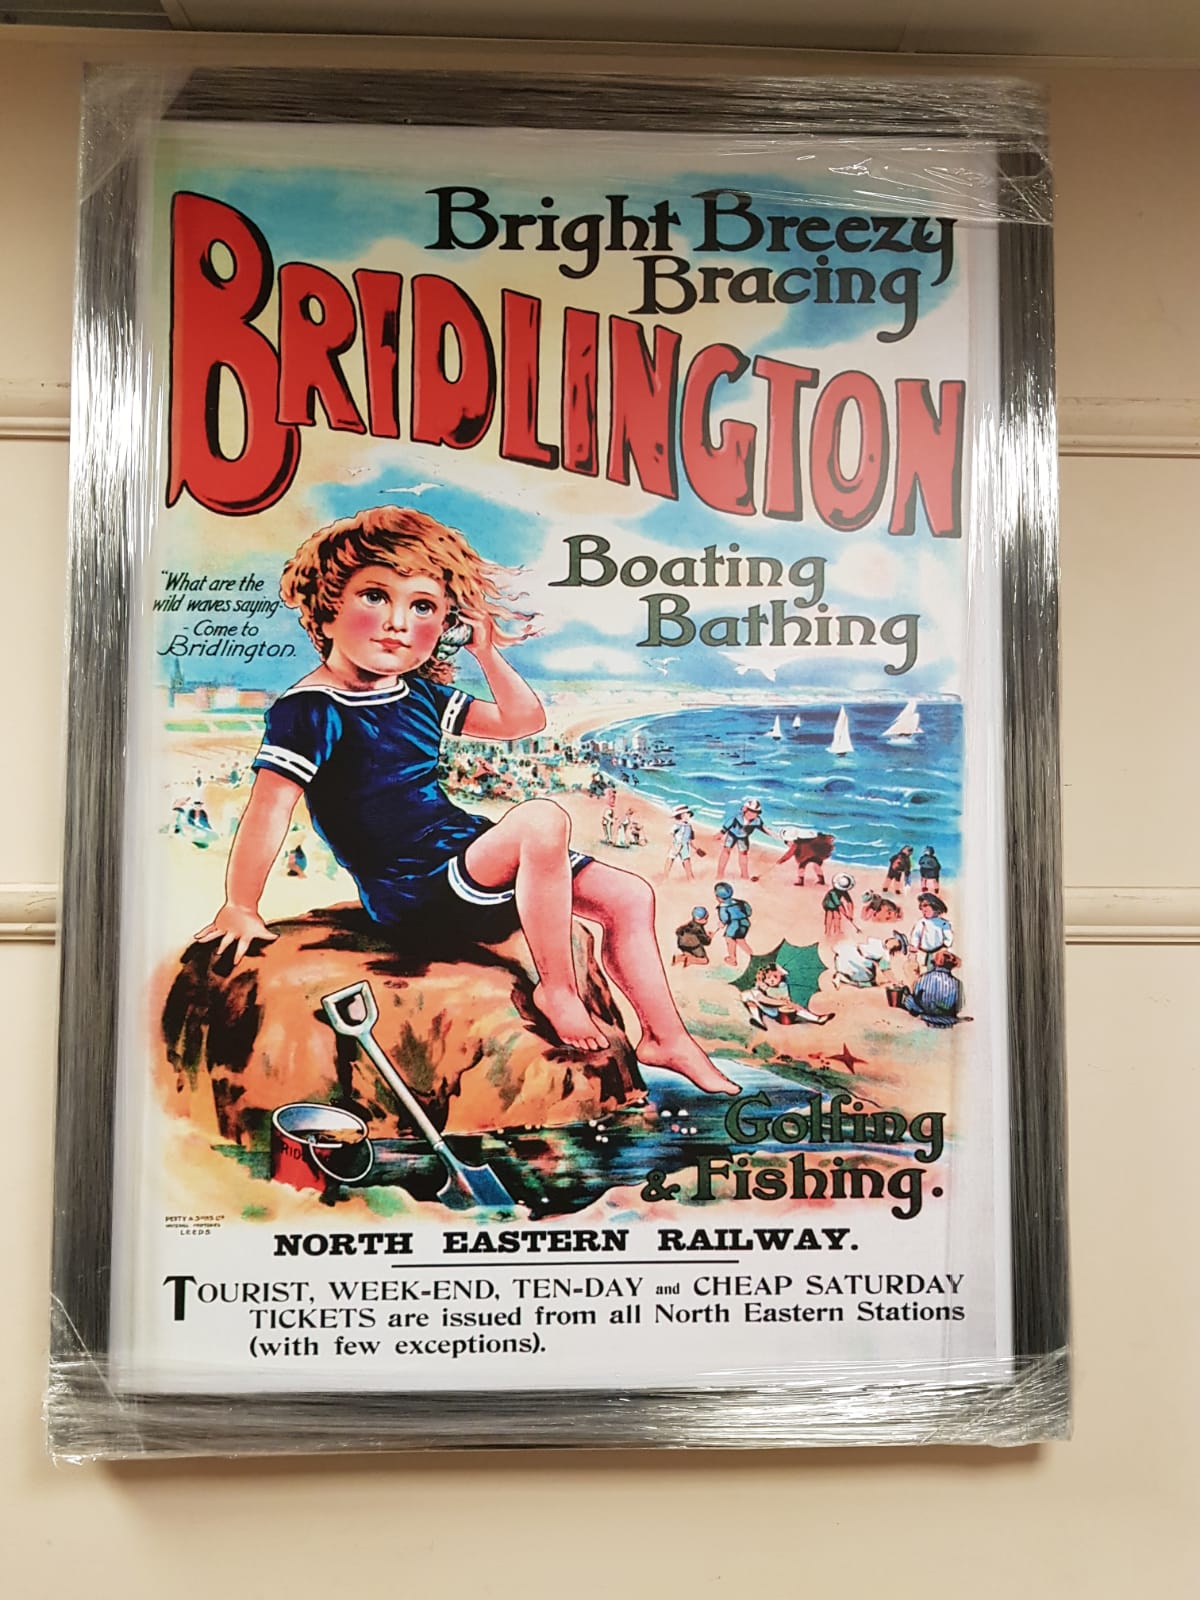 A railway advertising picture - Bright, breezy,